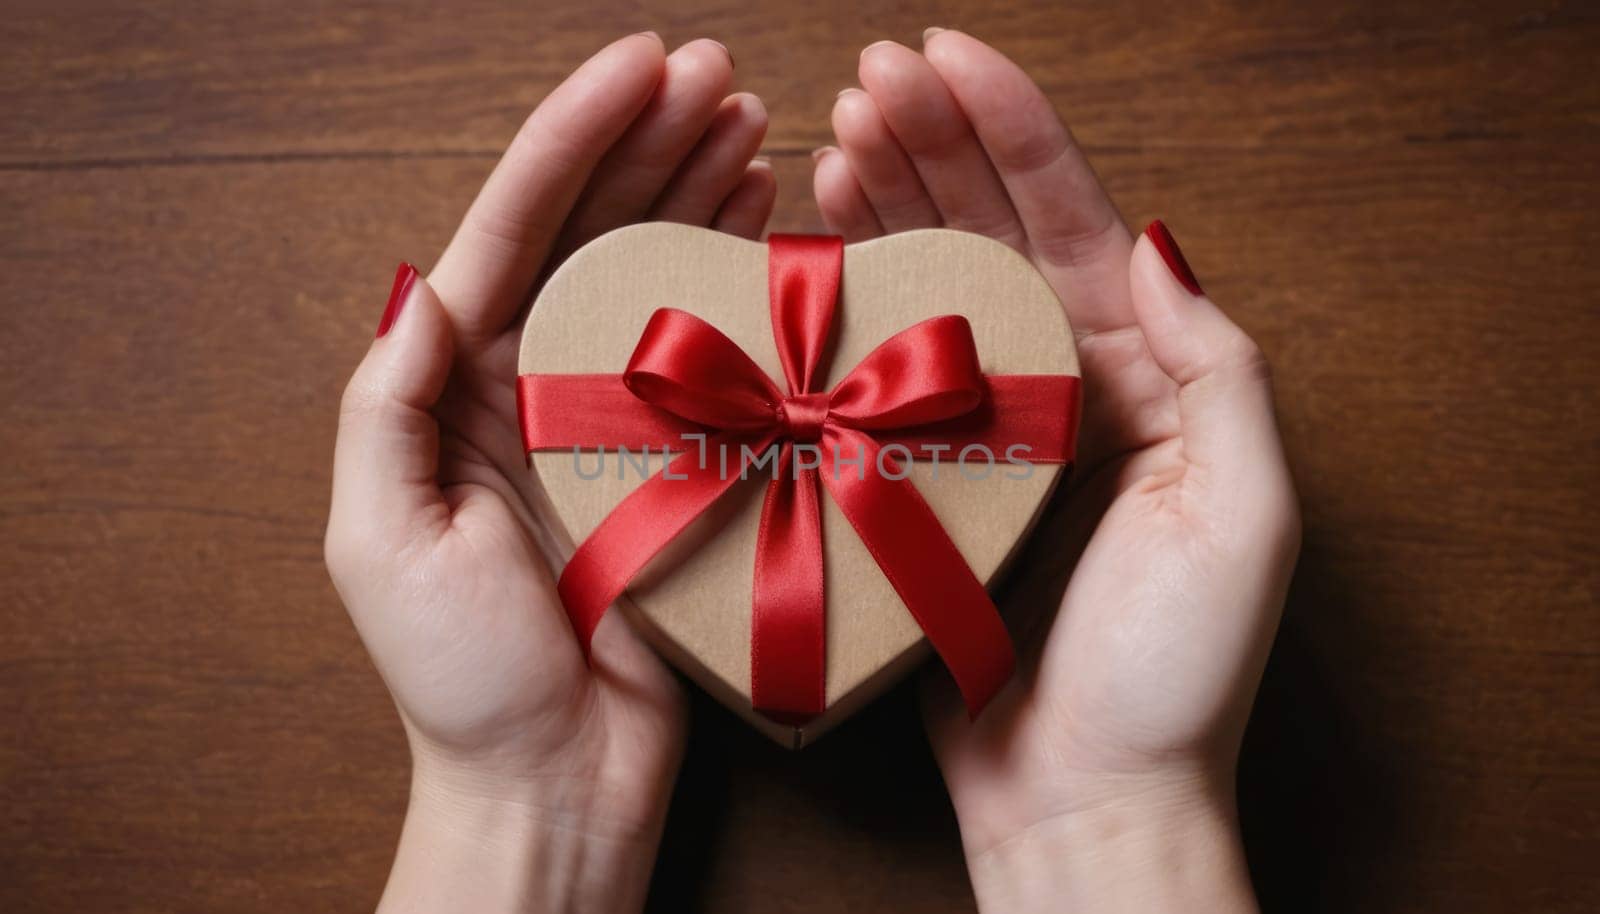 The image captures a tender moment of affection or love, with a warm and intimate setting. The wooden background contrasts with the smoothness of the hands and the gift box.